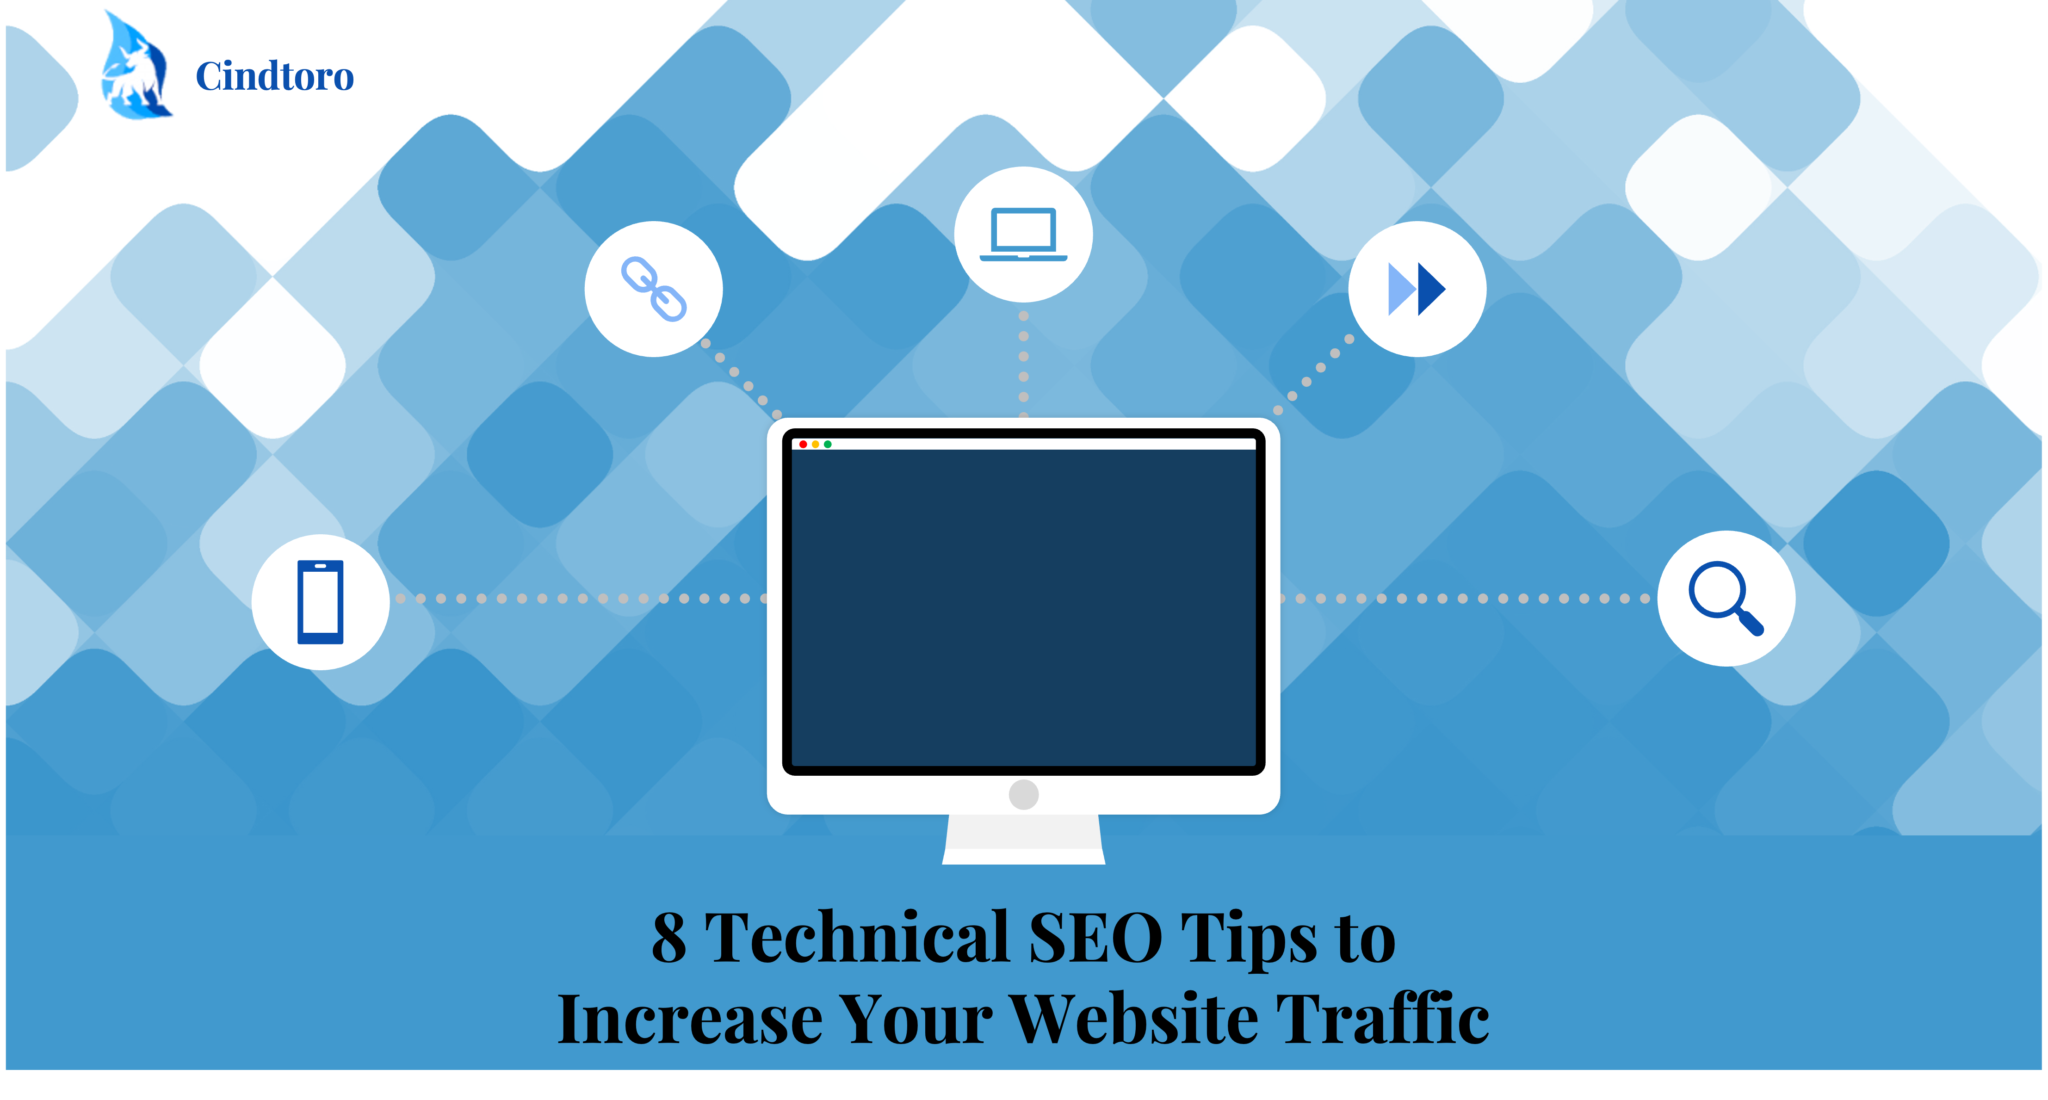 8 Technical SEO Tips to Increase Your Website Traffic